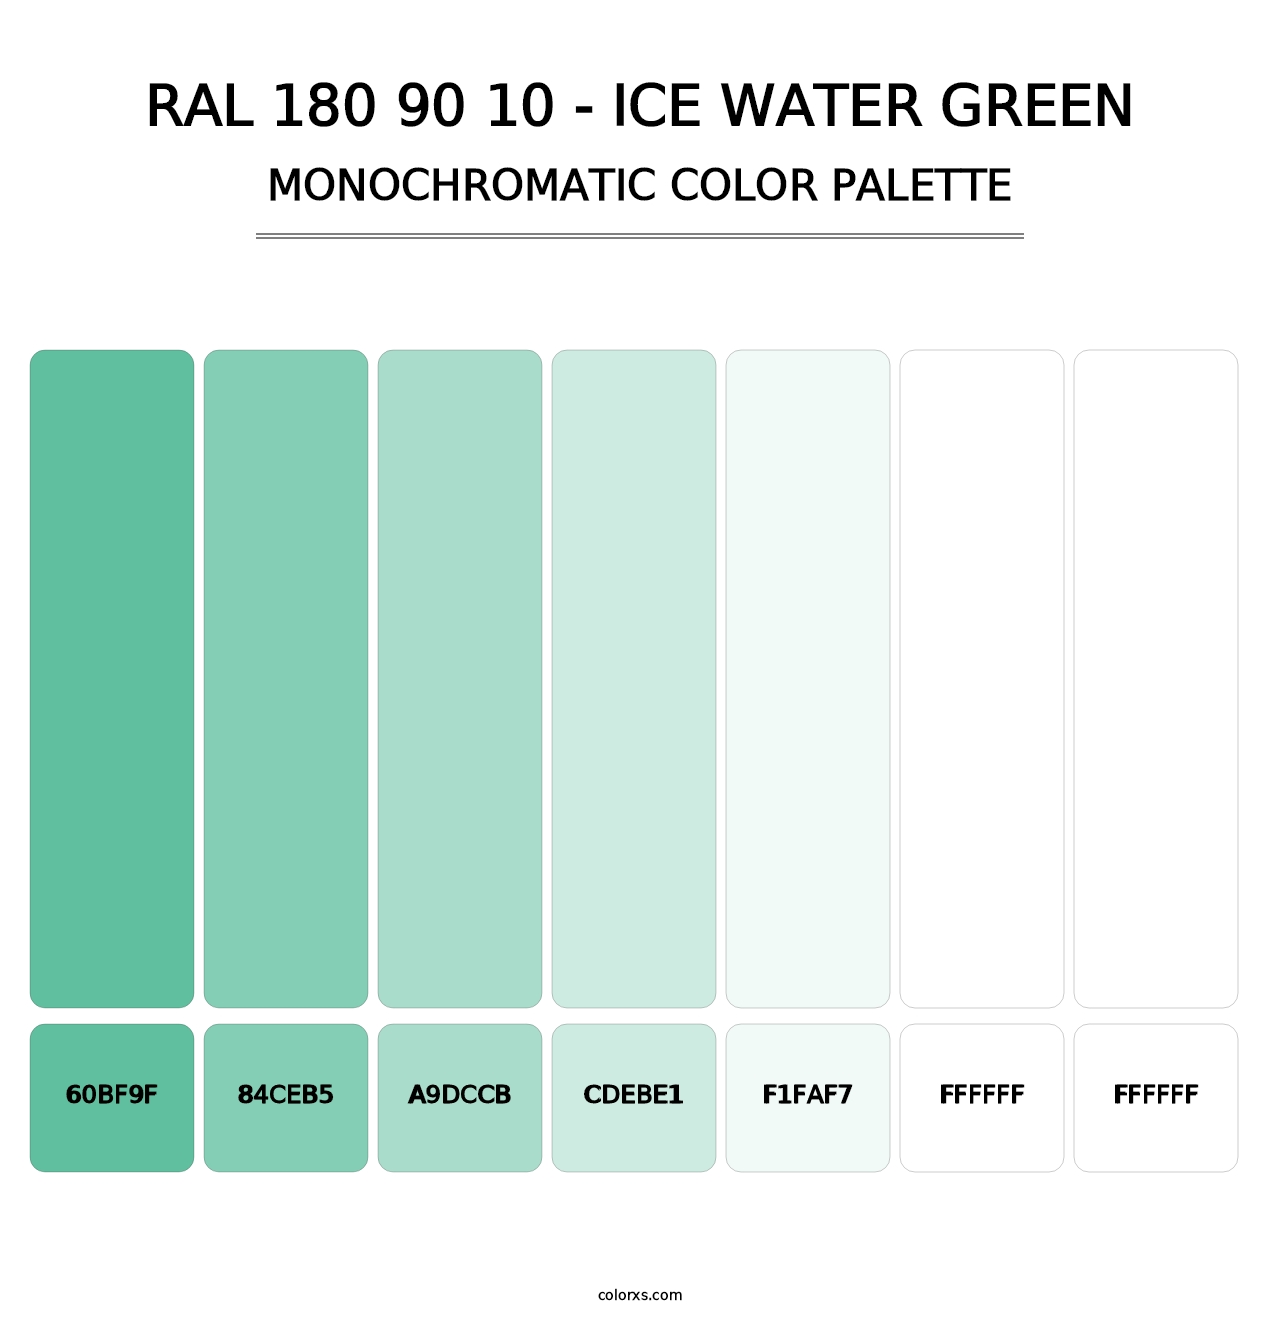 RAL 180 90 10 - Ice Water Green - Monochromatic Color Palette